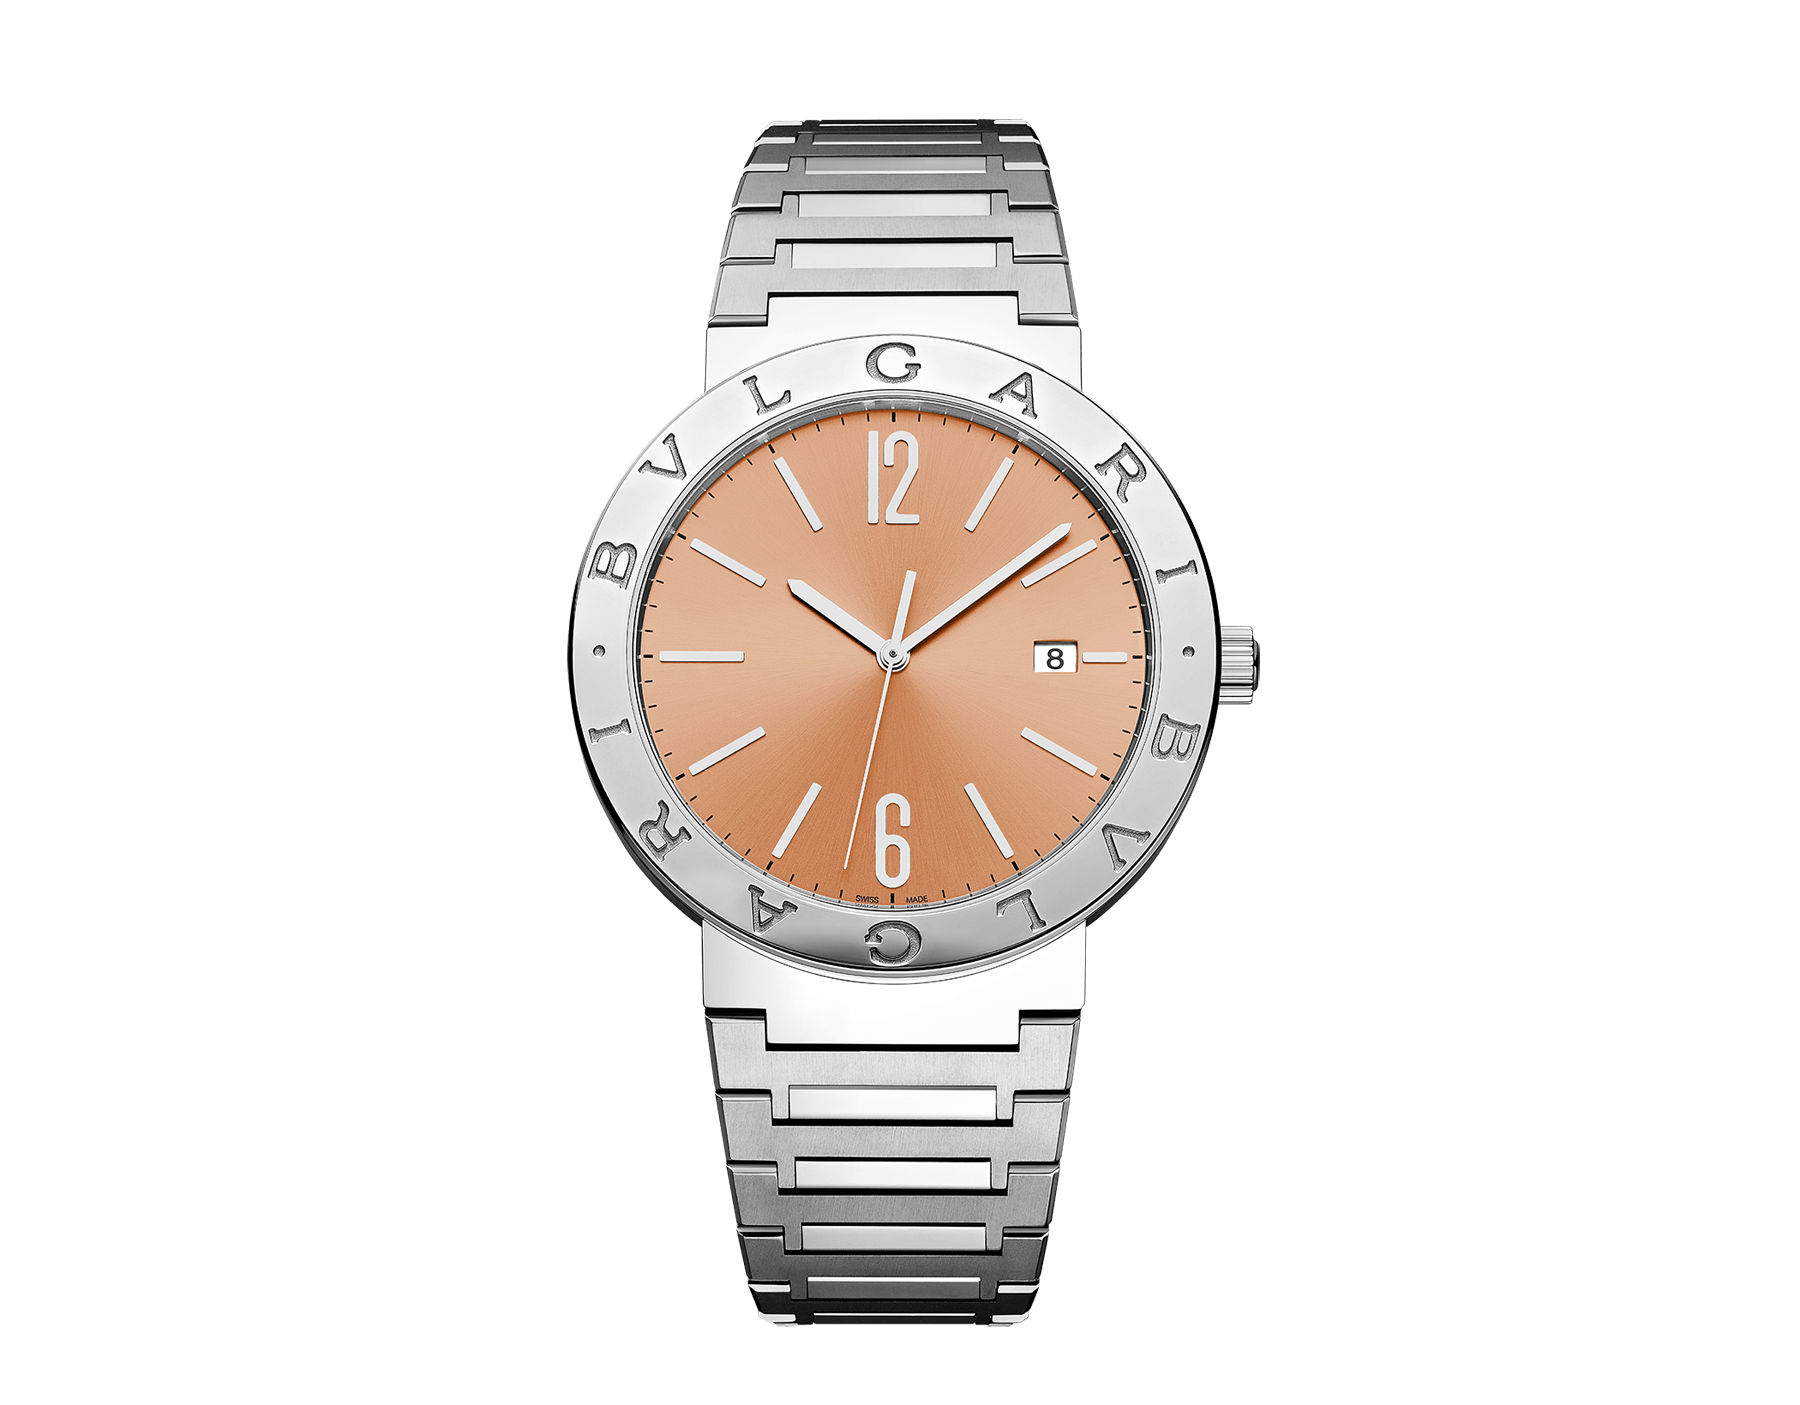 BULGARI BULGARI watch with mechanical manufacture automatic movement, satin-polished stainless steel case, bracelet and bezel engraved with the double BULGARI logo and orange lacquered sunray dial. Water-resistant up to 50 meters. Resort Limited Edition of 65 pieces. 103683 image 1